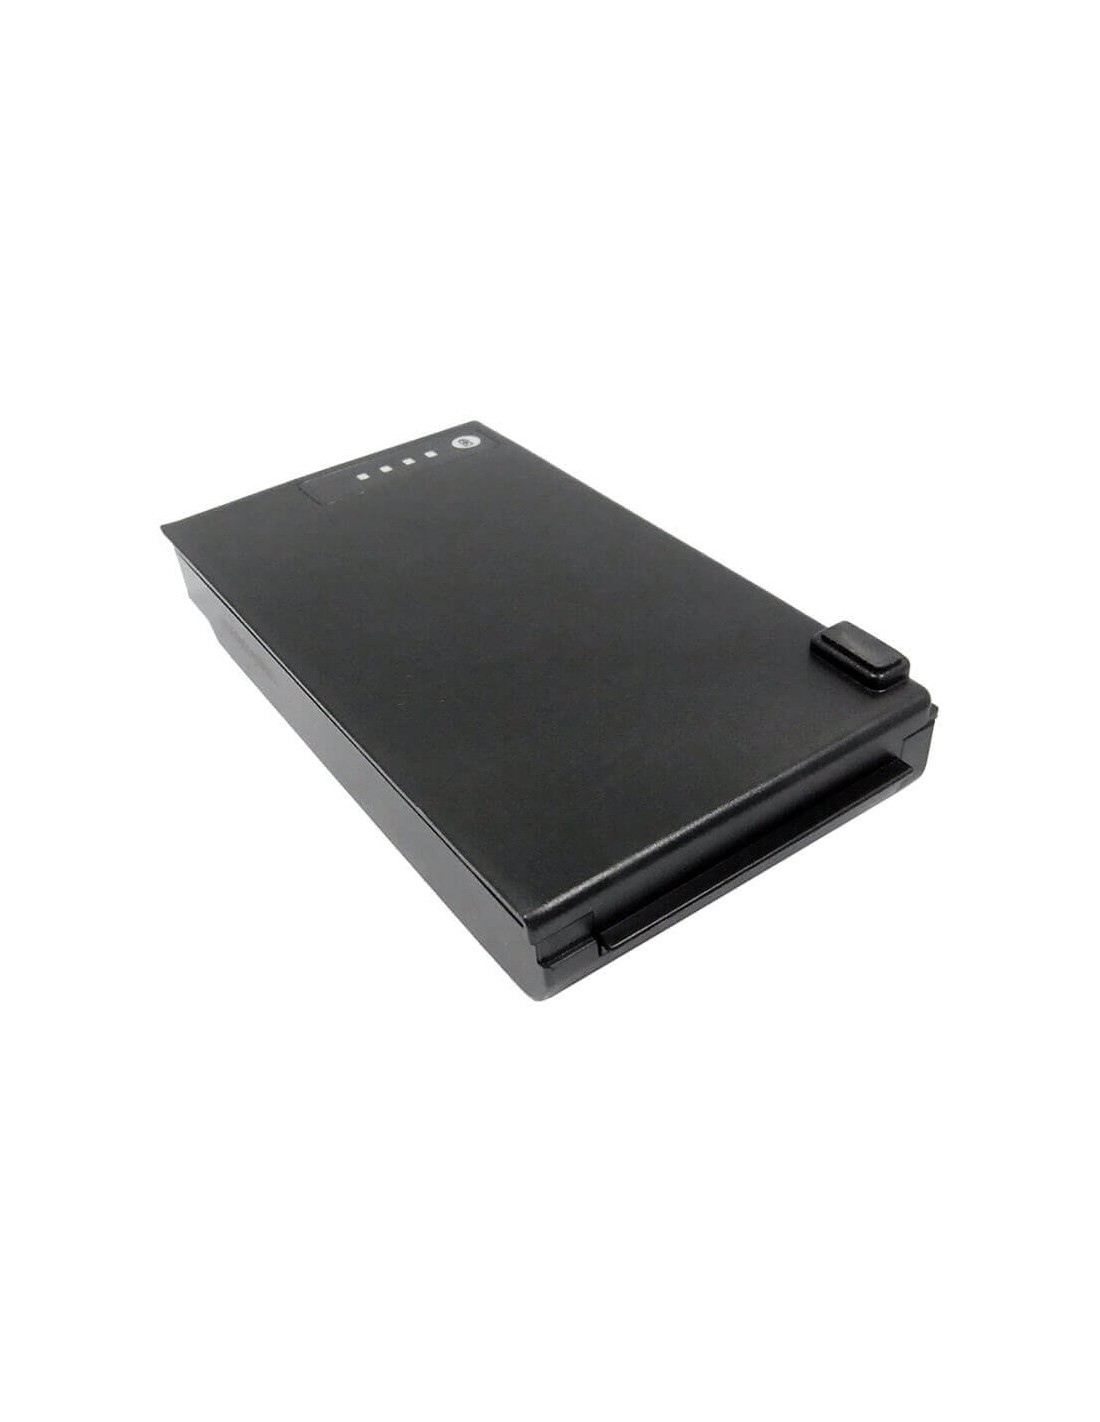 Black Battery for HP Business Notebook NC4400, Business Notebook TC4200, Business Notebook TC4400 10.8V, 4400mAh - 47.52Wh